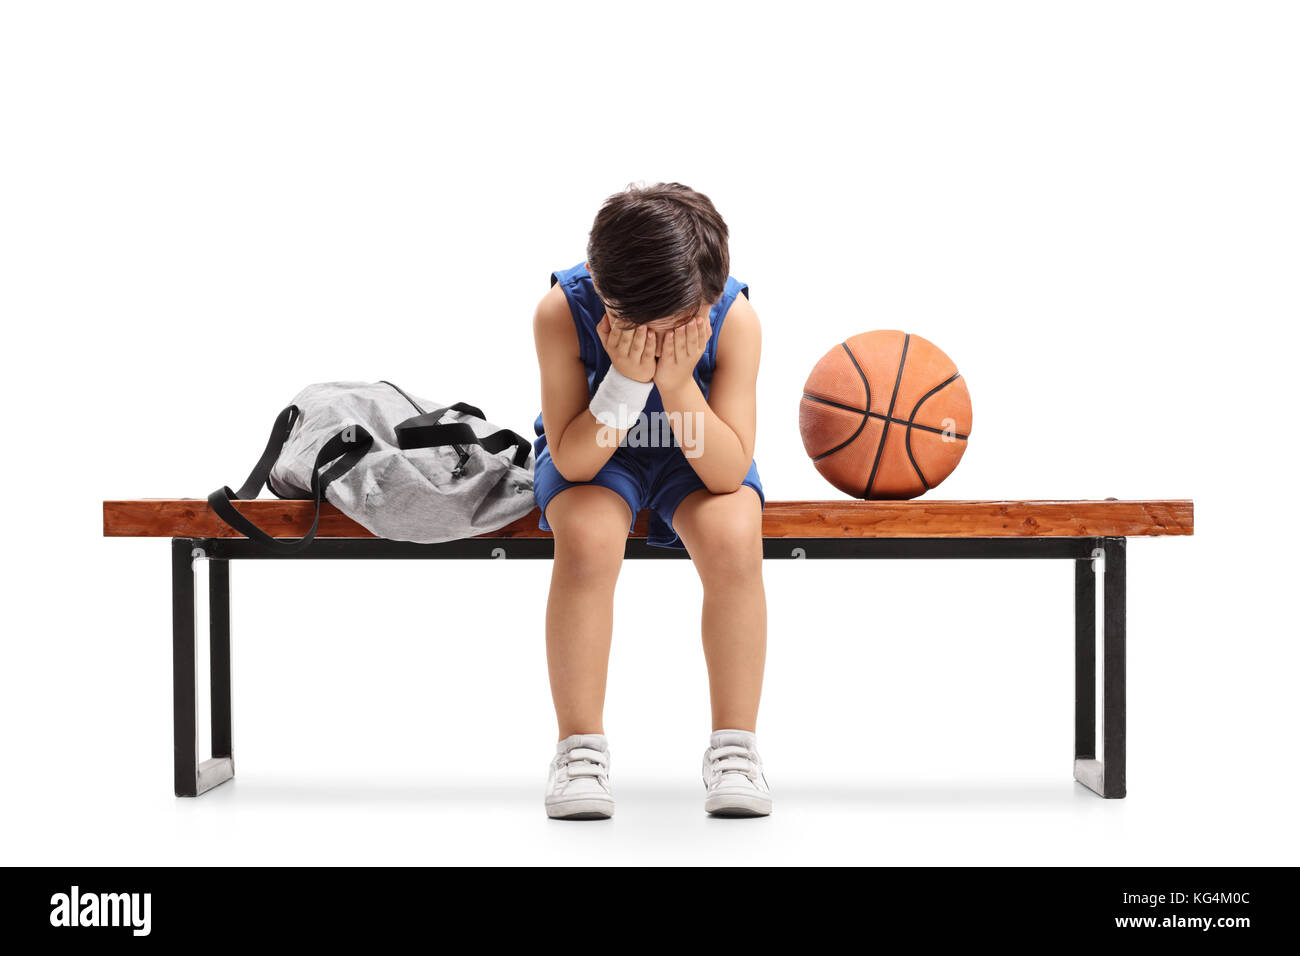 Sad little basketball player sitting on a bench and crying isolated on white background Stock Photo